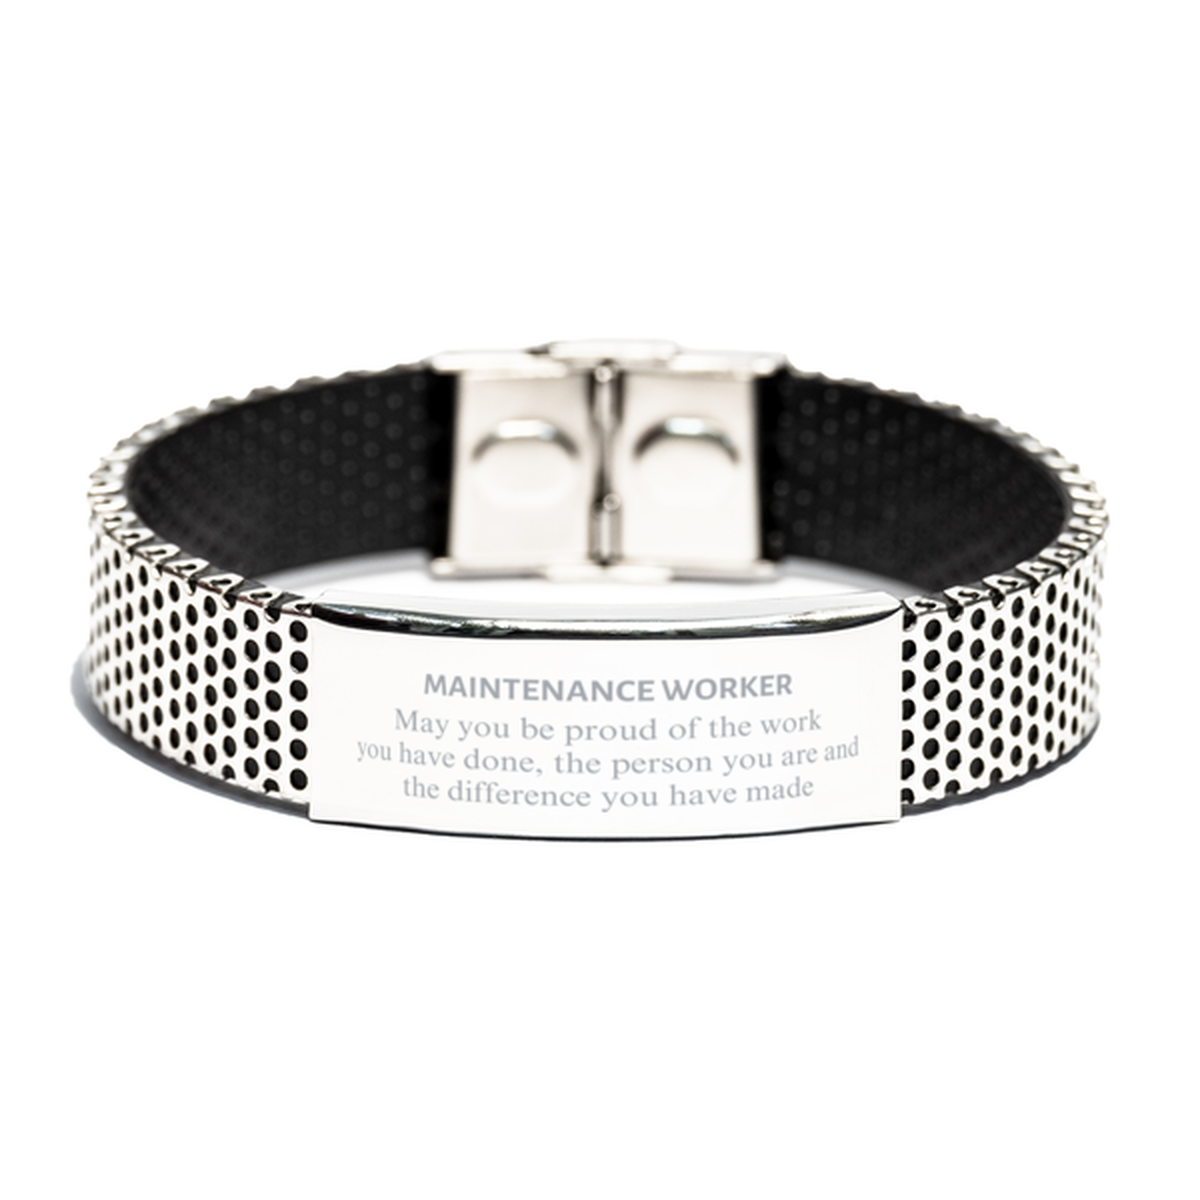 Maintenance Worker May you be proud of the work you have done, Retirement Maintenance Worker Stainless Steel Bracelet for Colleague Appreciation Gifts Amazing for Maintenance Worker